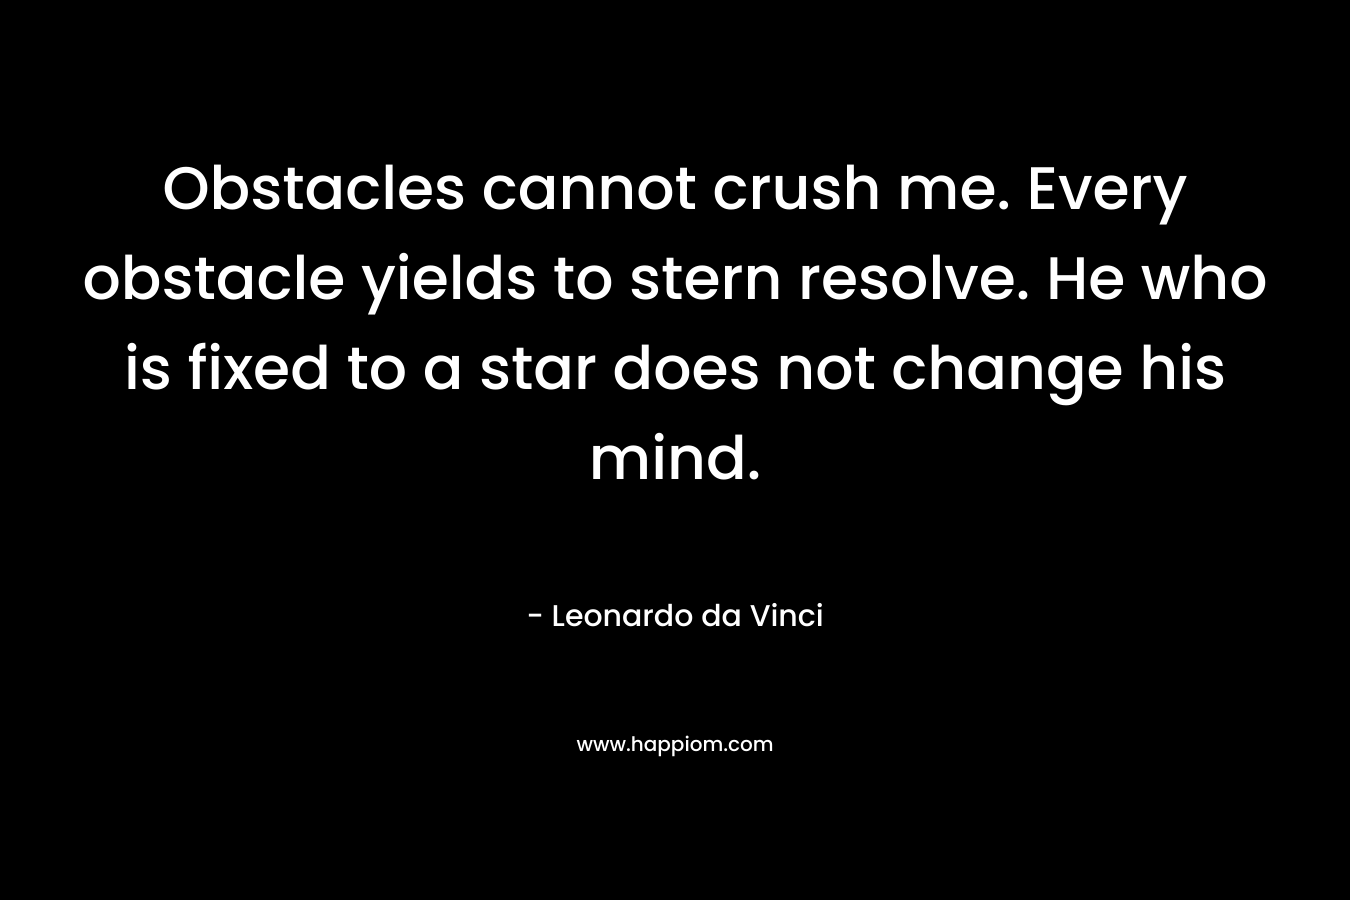 Obstacles cannot crush me. Every obstacle yields to stern resolve. He who is fixed to a star does not change his mind.